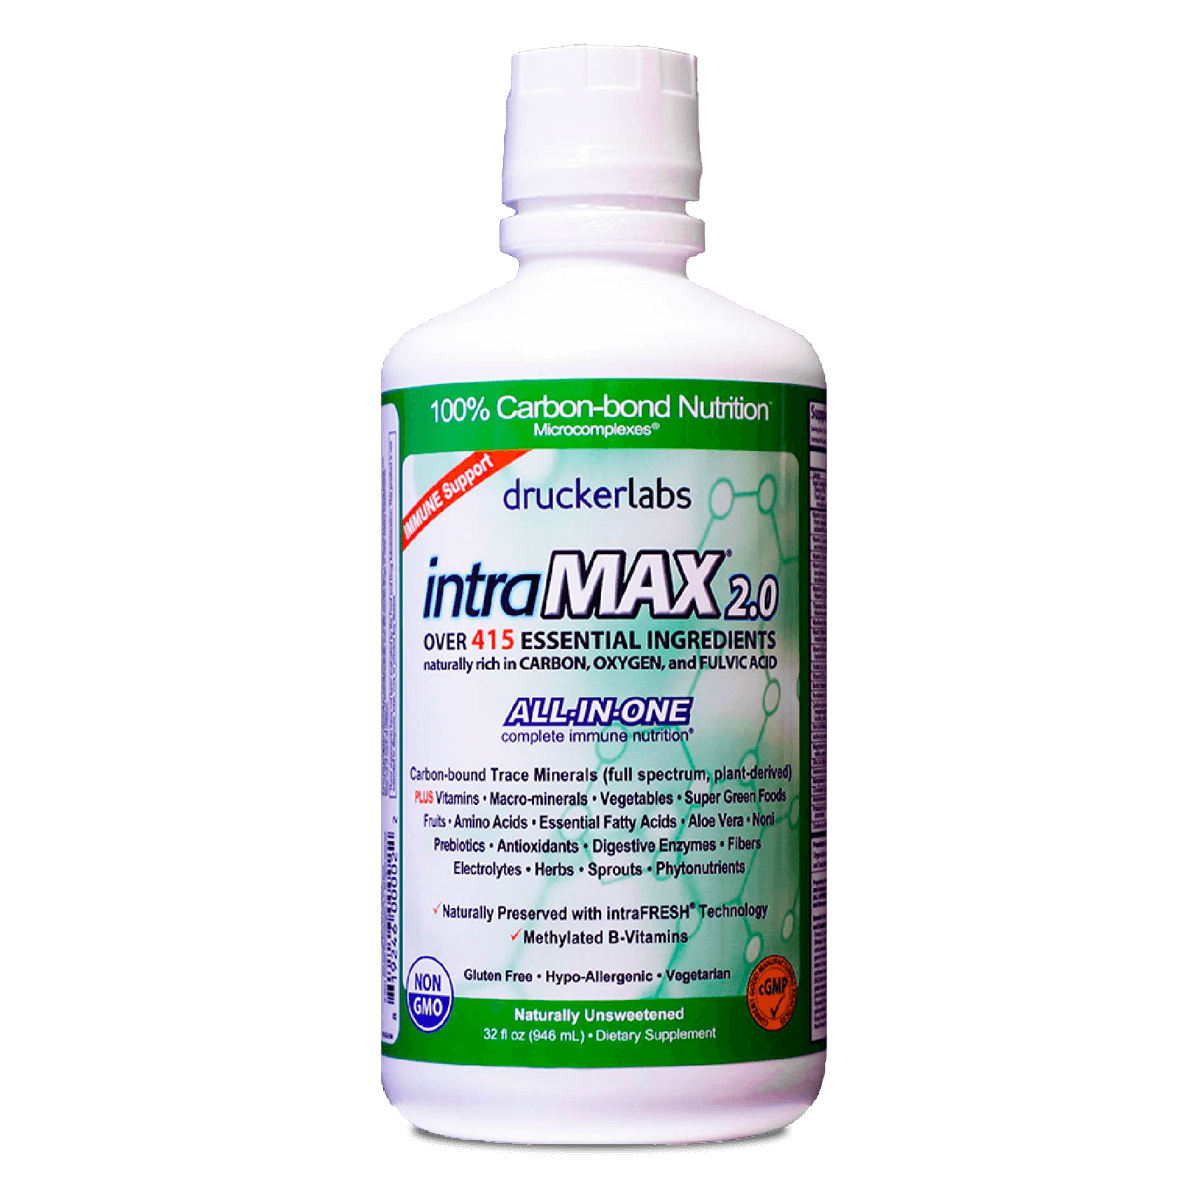 intraMAX 2.0 (Naturally Unsweetened)